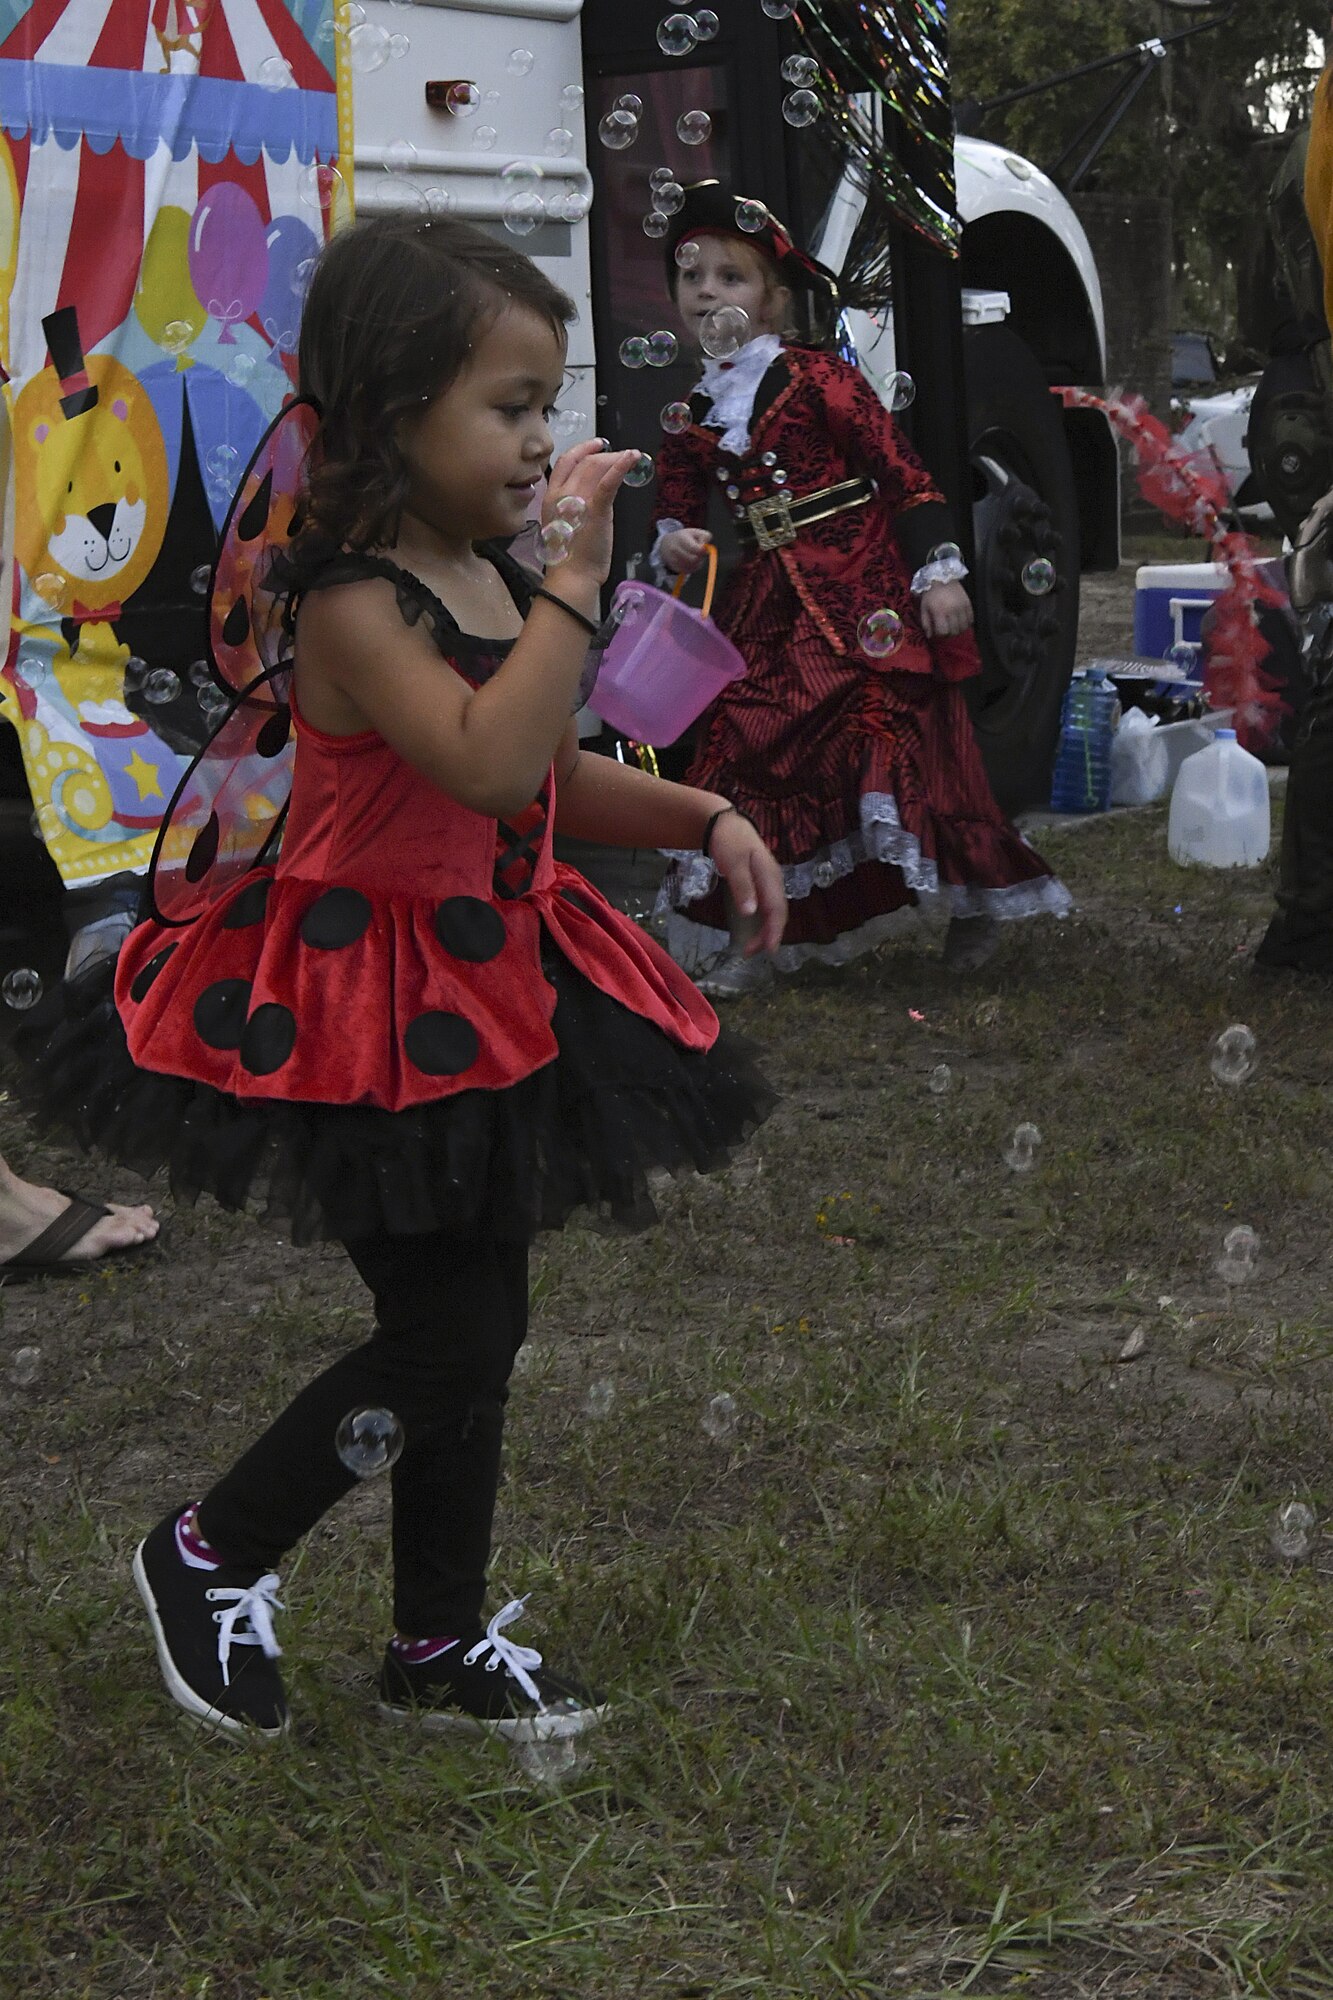 Lilyanne Fine, daughter of U.S. Air Force Senior Master Sgt. (Ret.) Barrett Fine, pops bubbles during Ghouls in the Park at Marina Park at Keesler Air Force Base, Mississippi, Oct. 26, 2018. Ghouls in the Park also featured the Boo Bus, a haunted house and various games for children of all ages. (U.S. Air Force photo by Airman 1st Class Suzie Plotnikov)